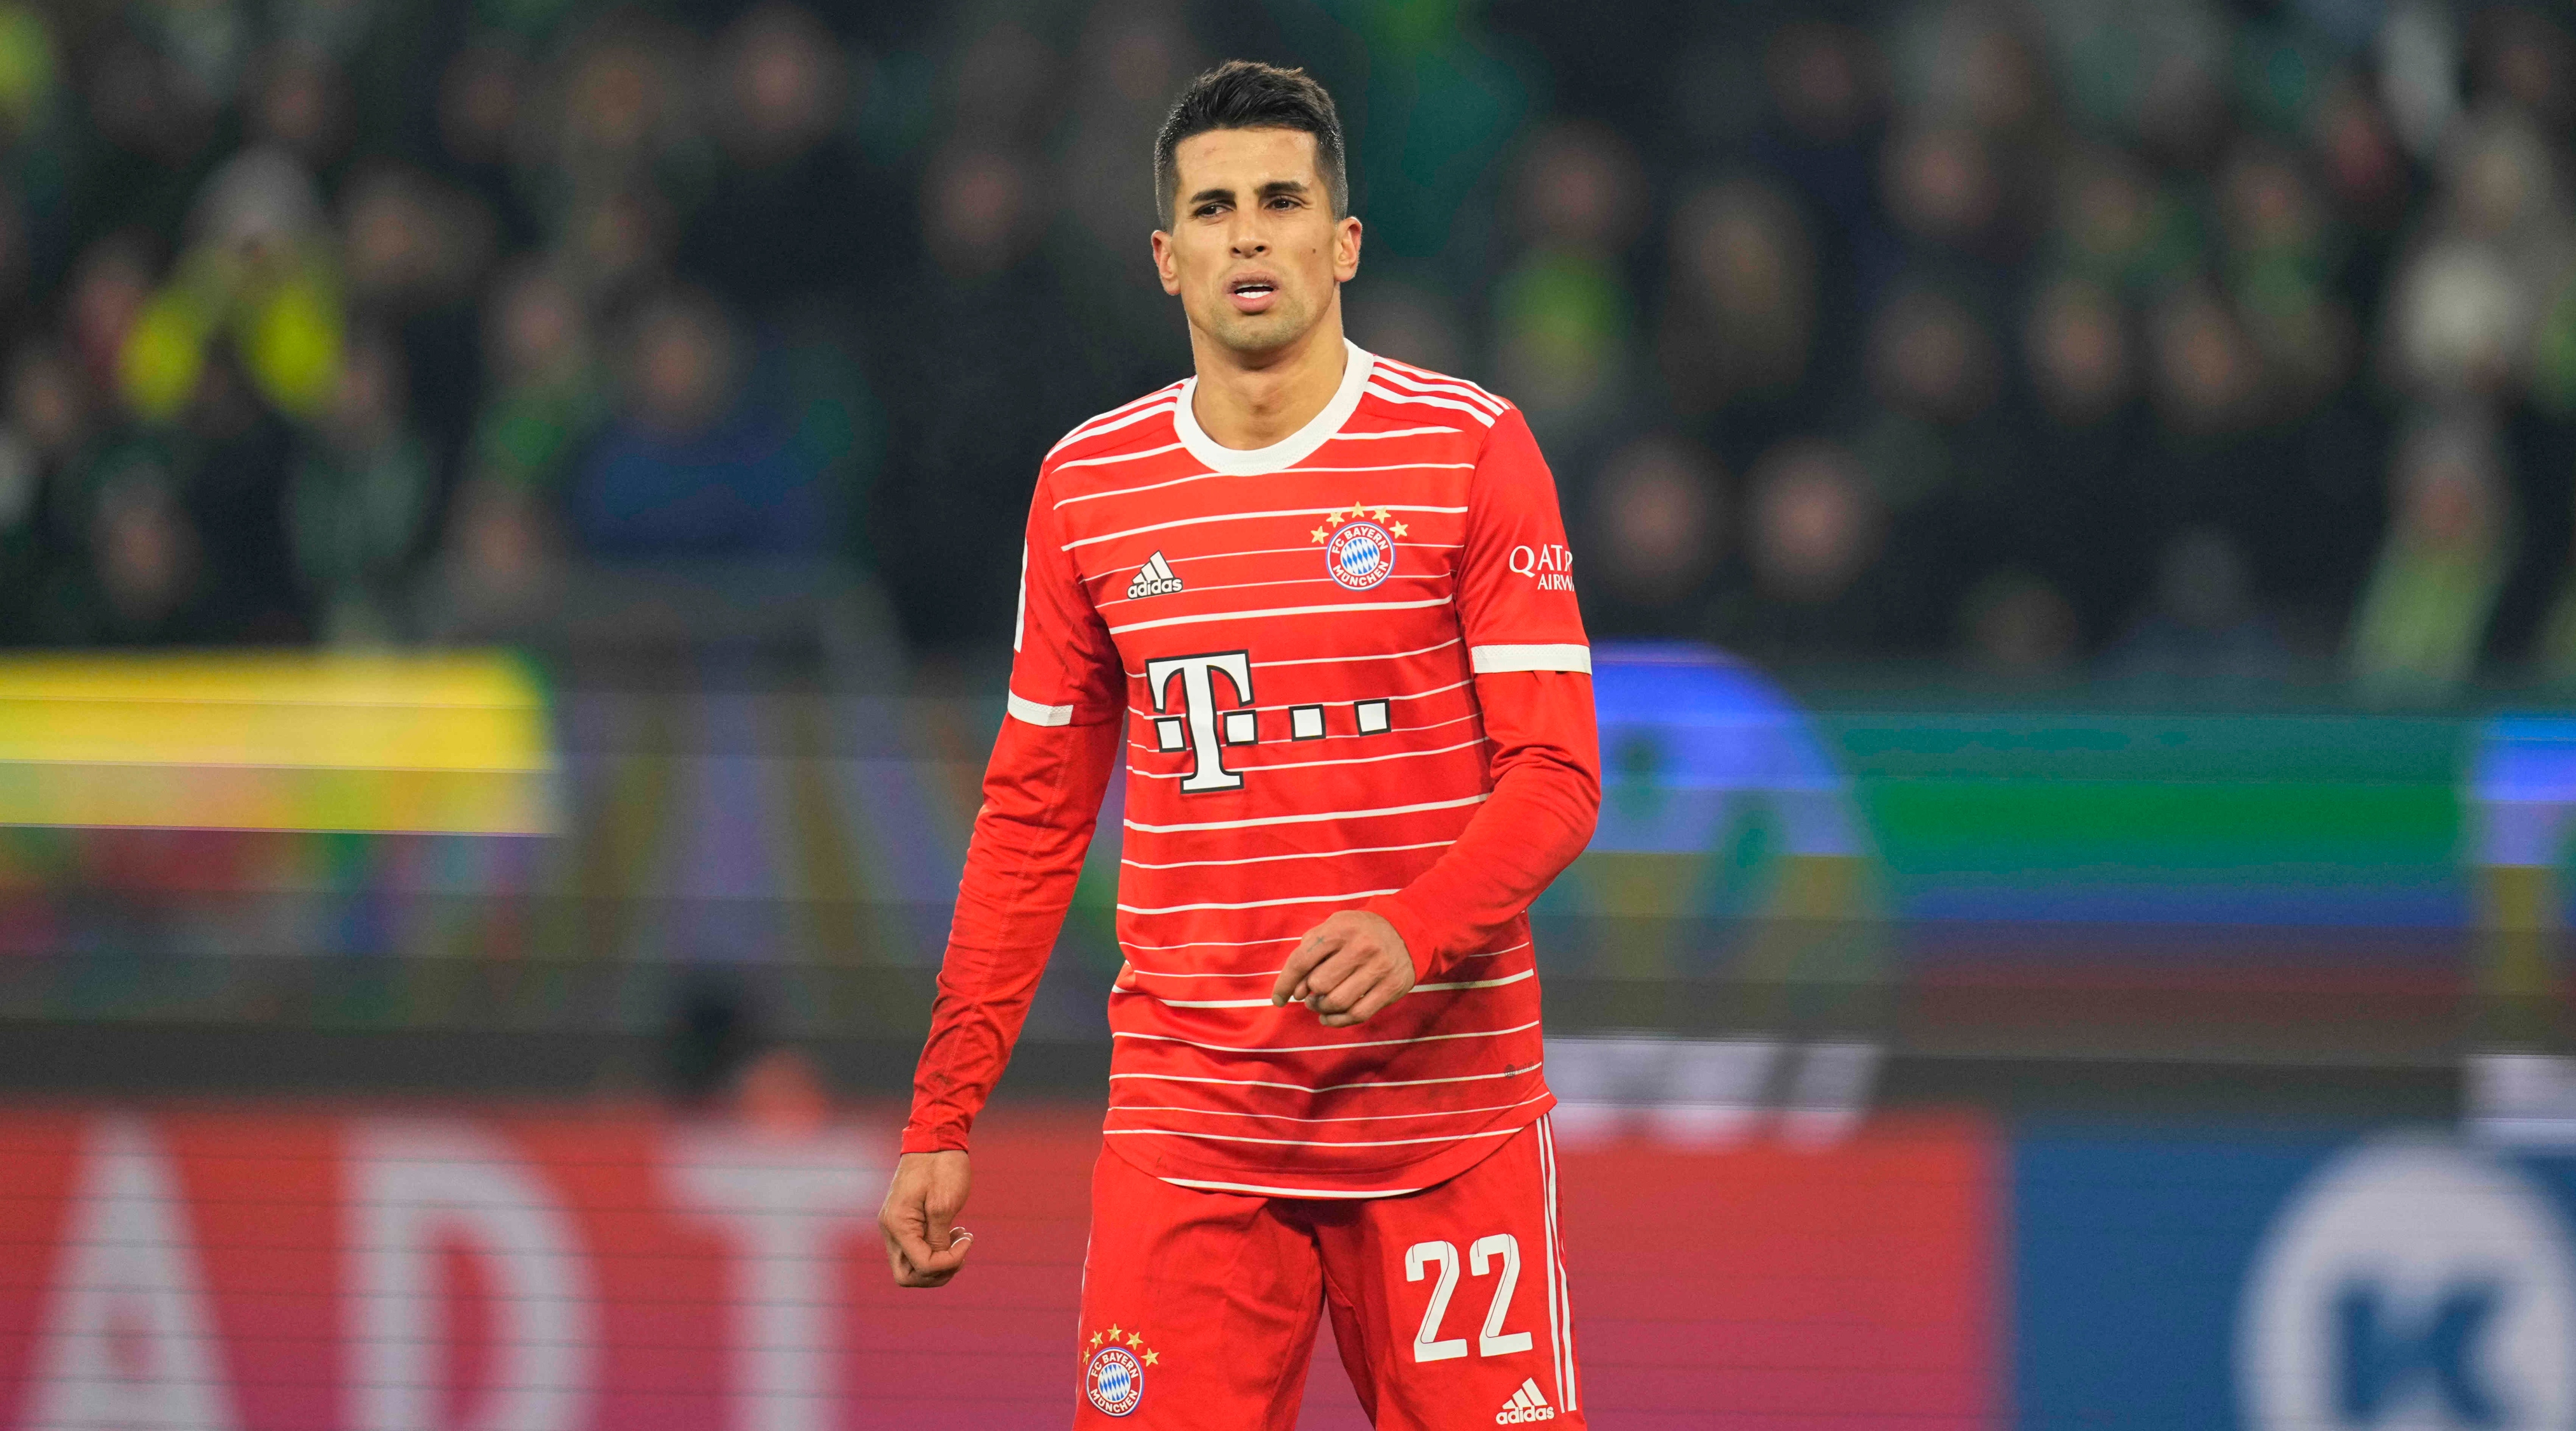 Joao Cancelo of Bayern Munich reacts during the Bundesliga match between Wolfsburg and Bayern Munich at the Volkswagen Arena in Wolfsburg, Germany on 5 February, 2023.